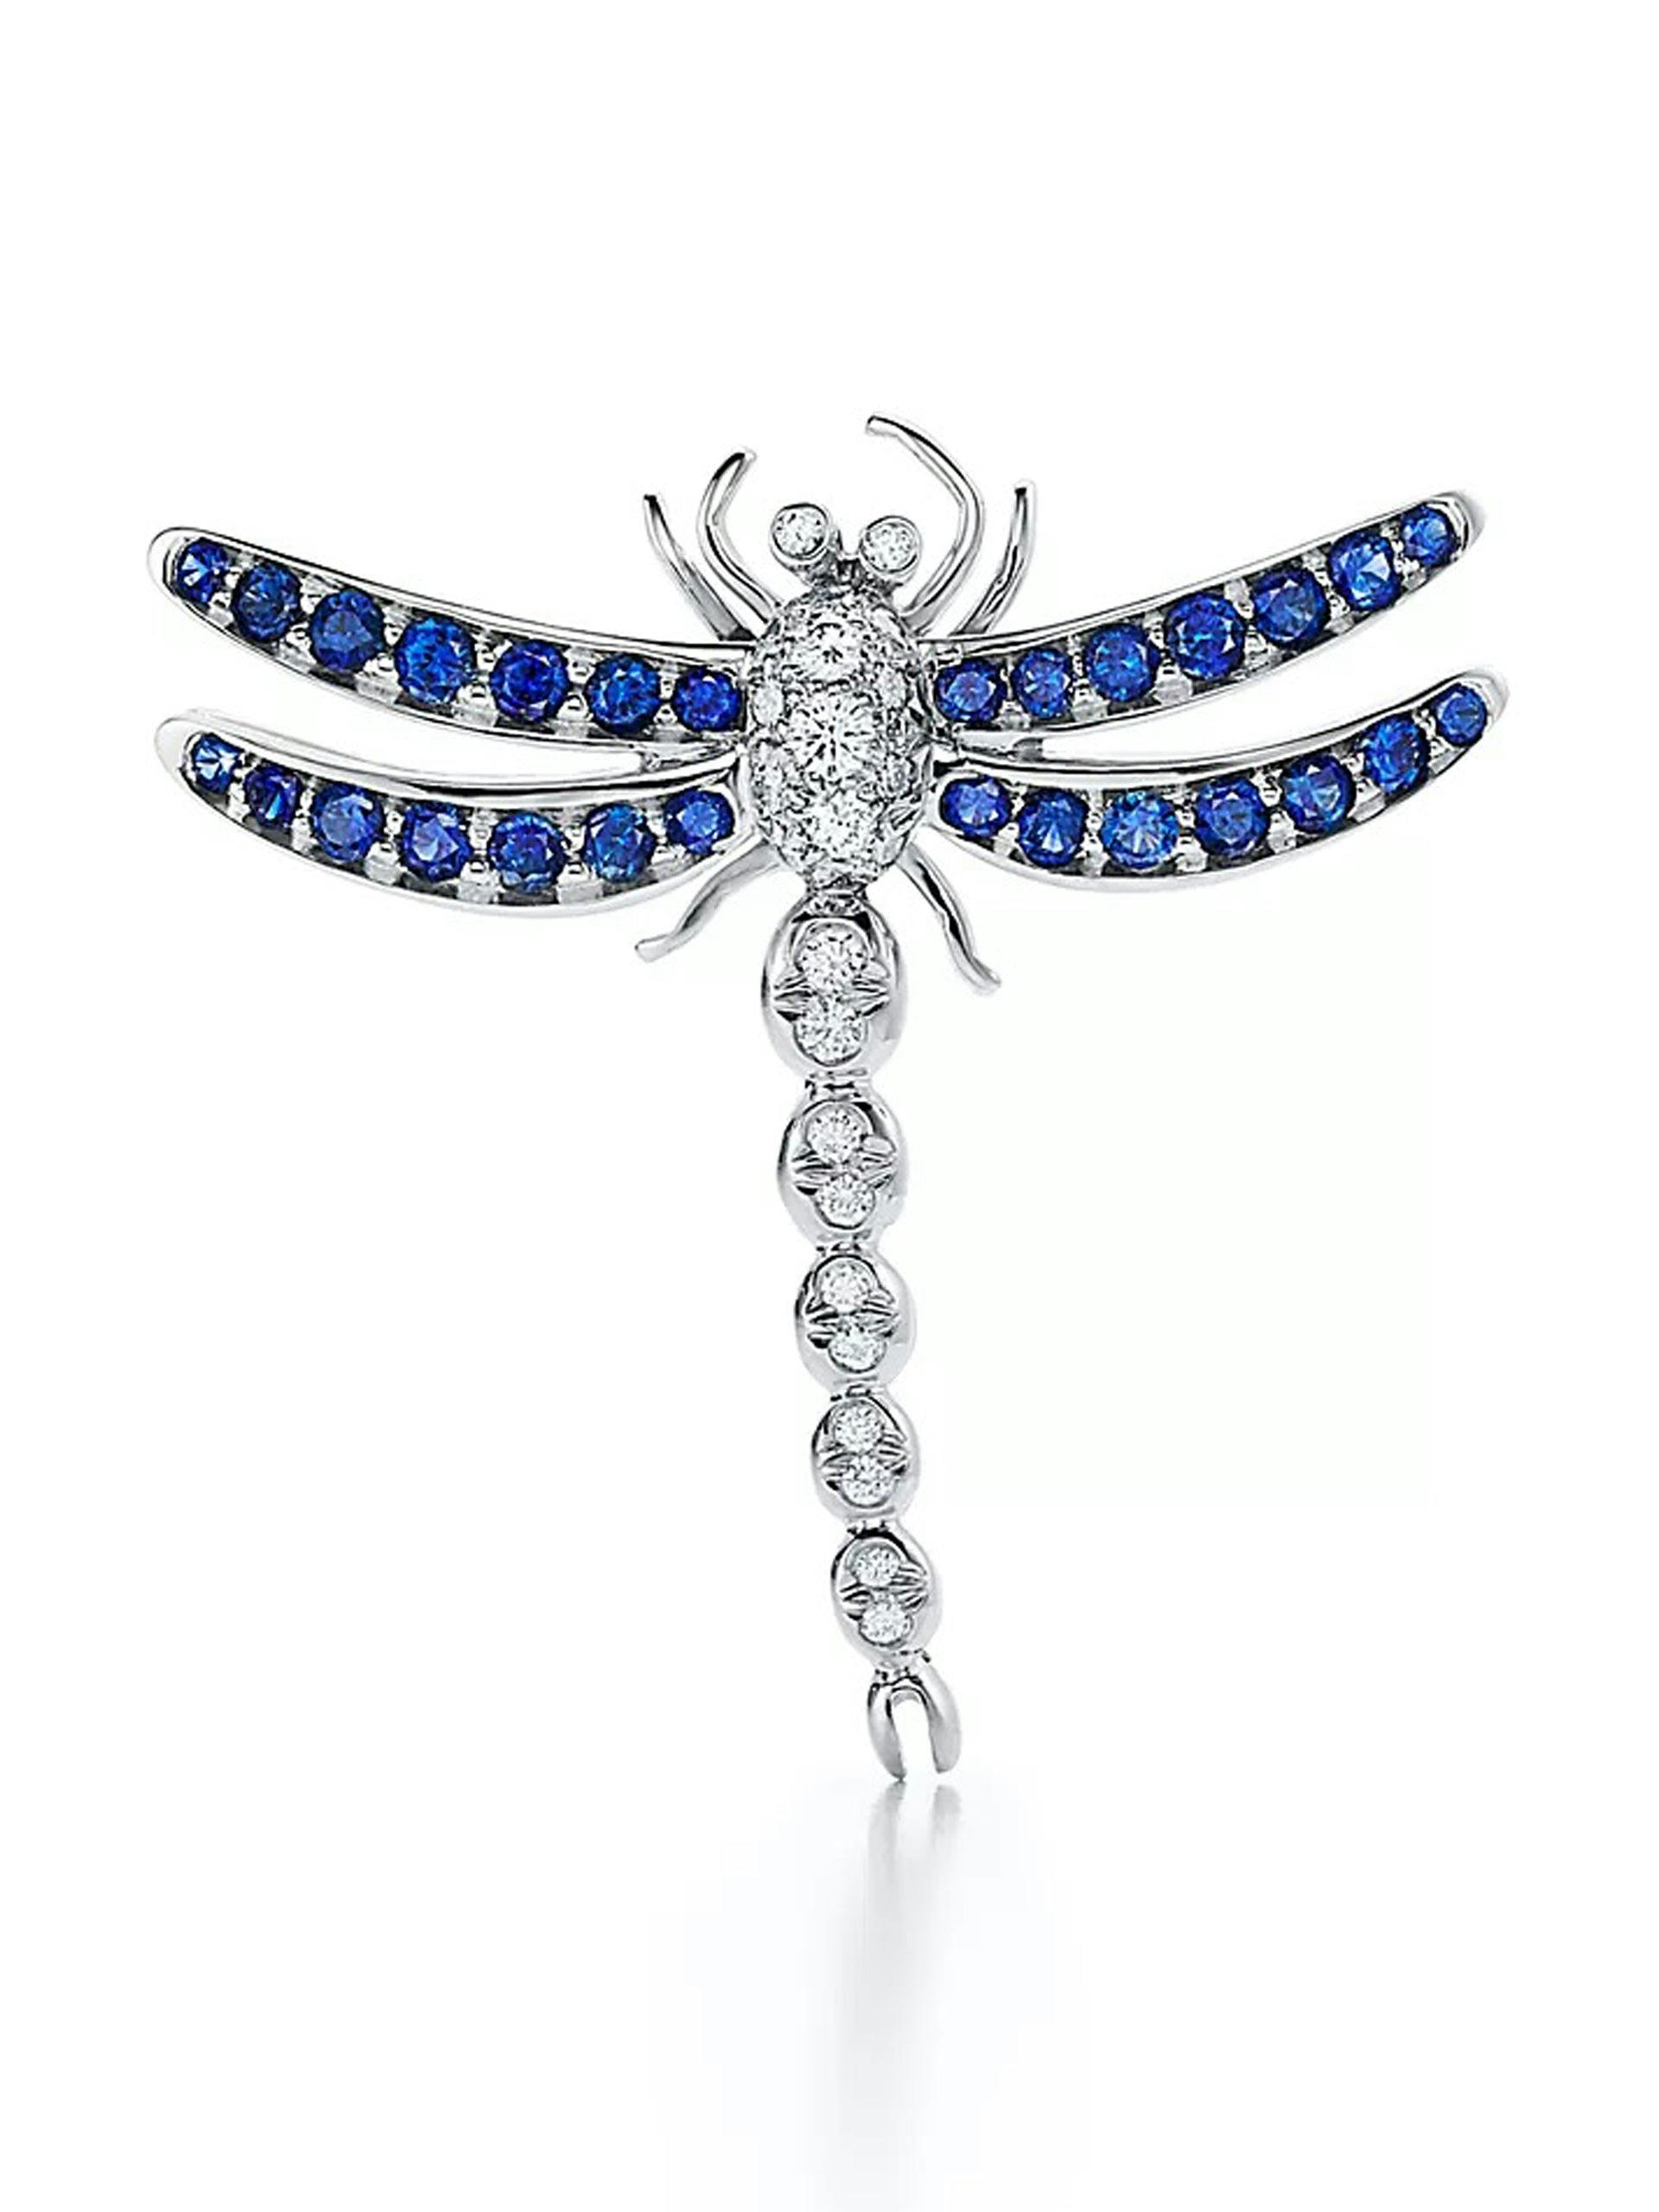 Platinum and sapphire dragonfly brooch